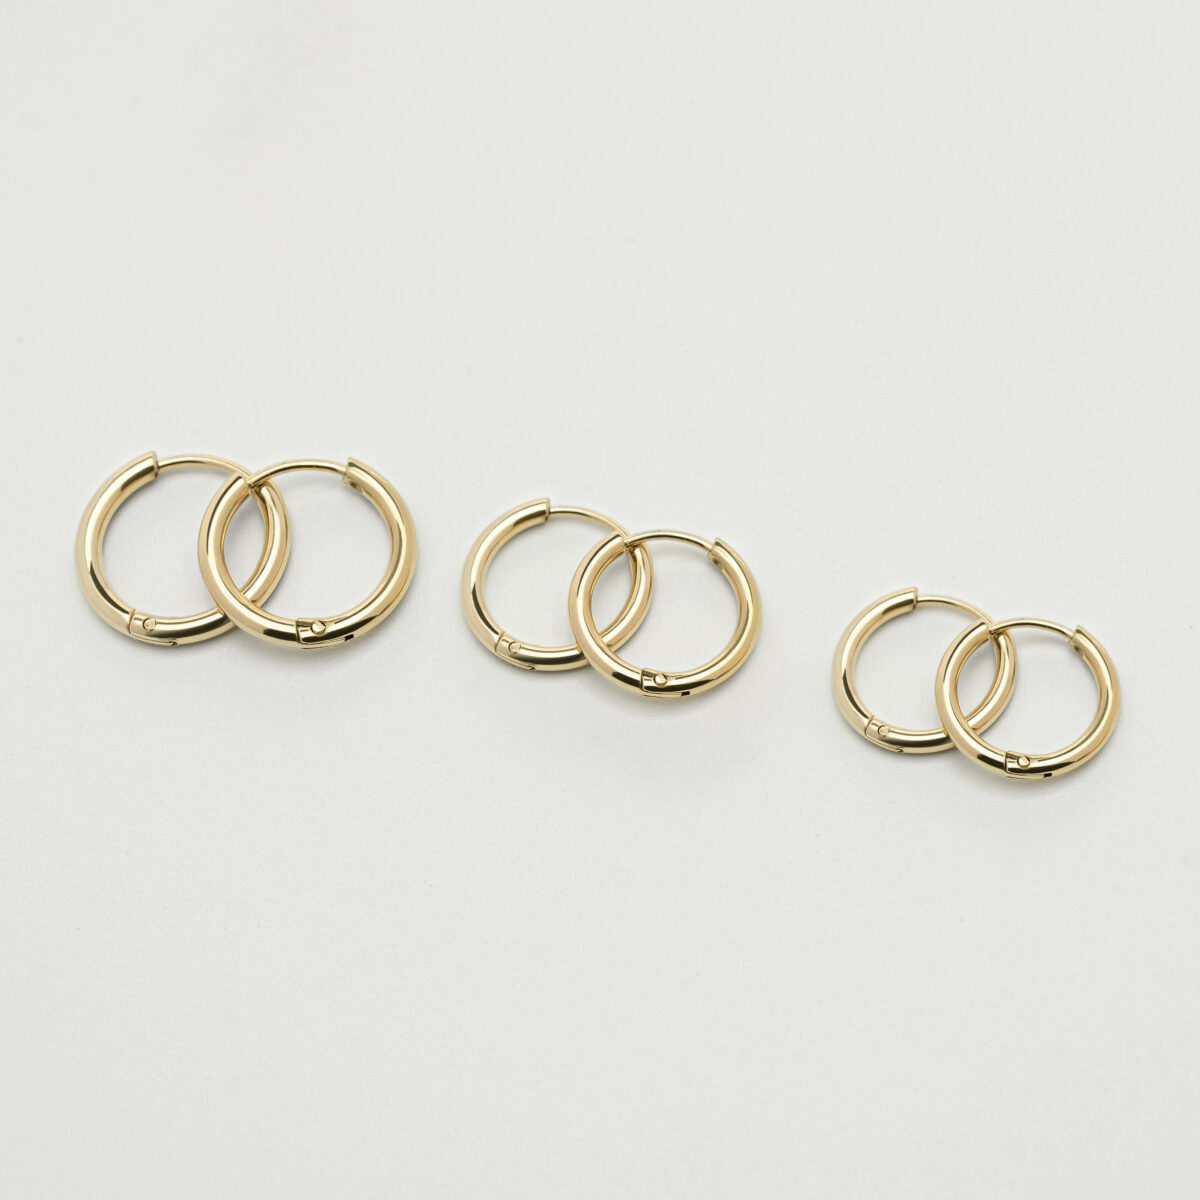 https://m.clubbella.co/product/classic-tunnel-hoop-earrings-set/ CLASSIC TUNNEL HOOP SET (2)